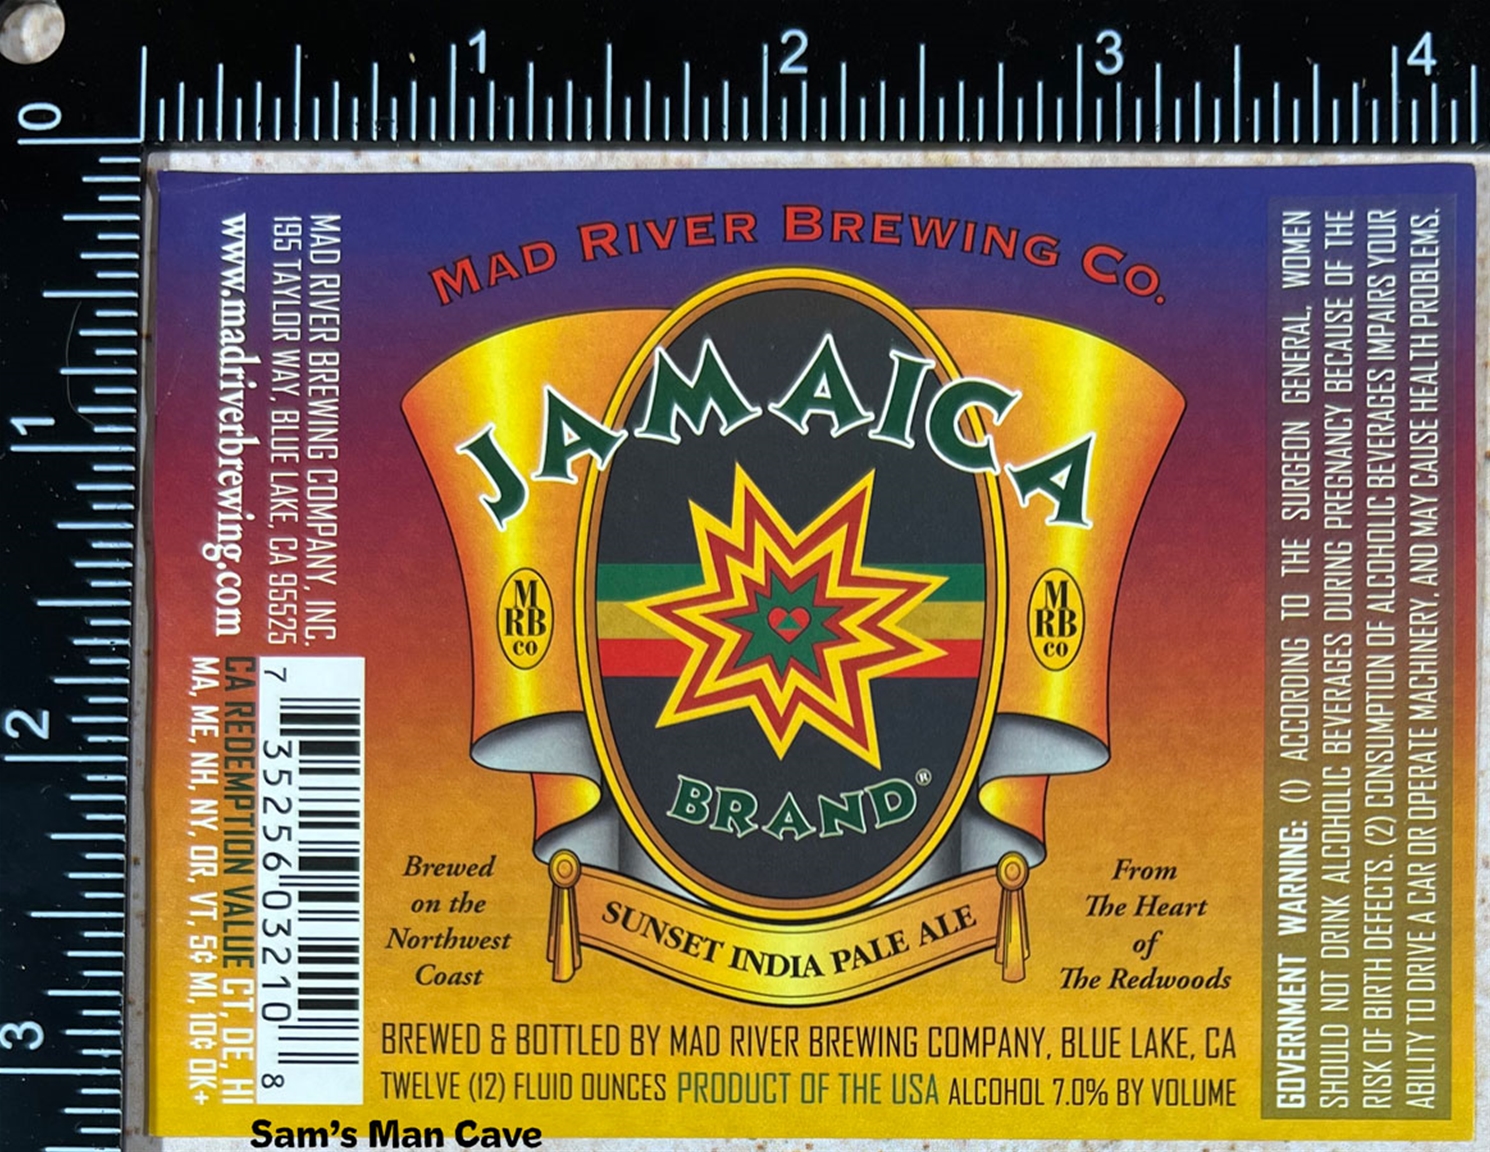 Mad River Jamaica Sunset India Pale Ale Label